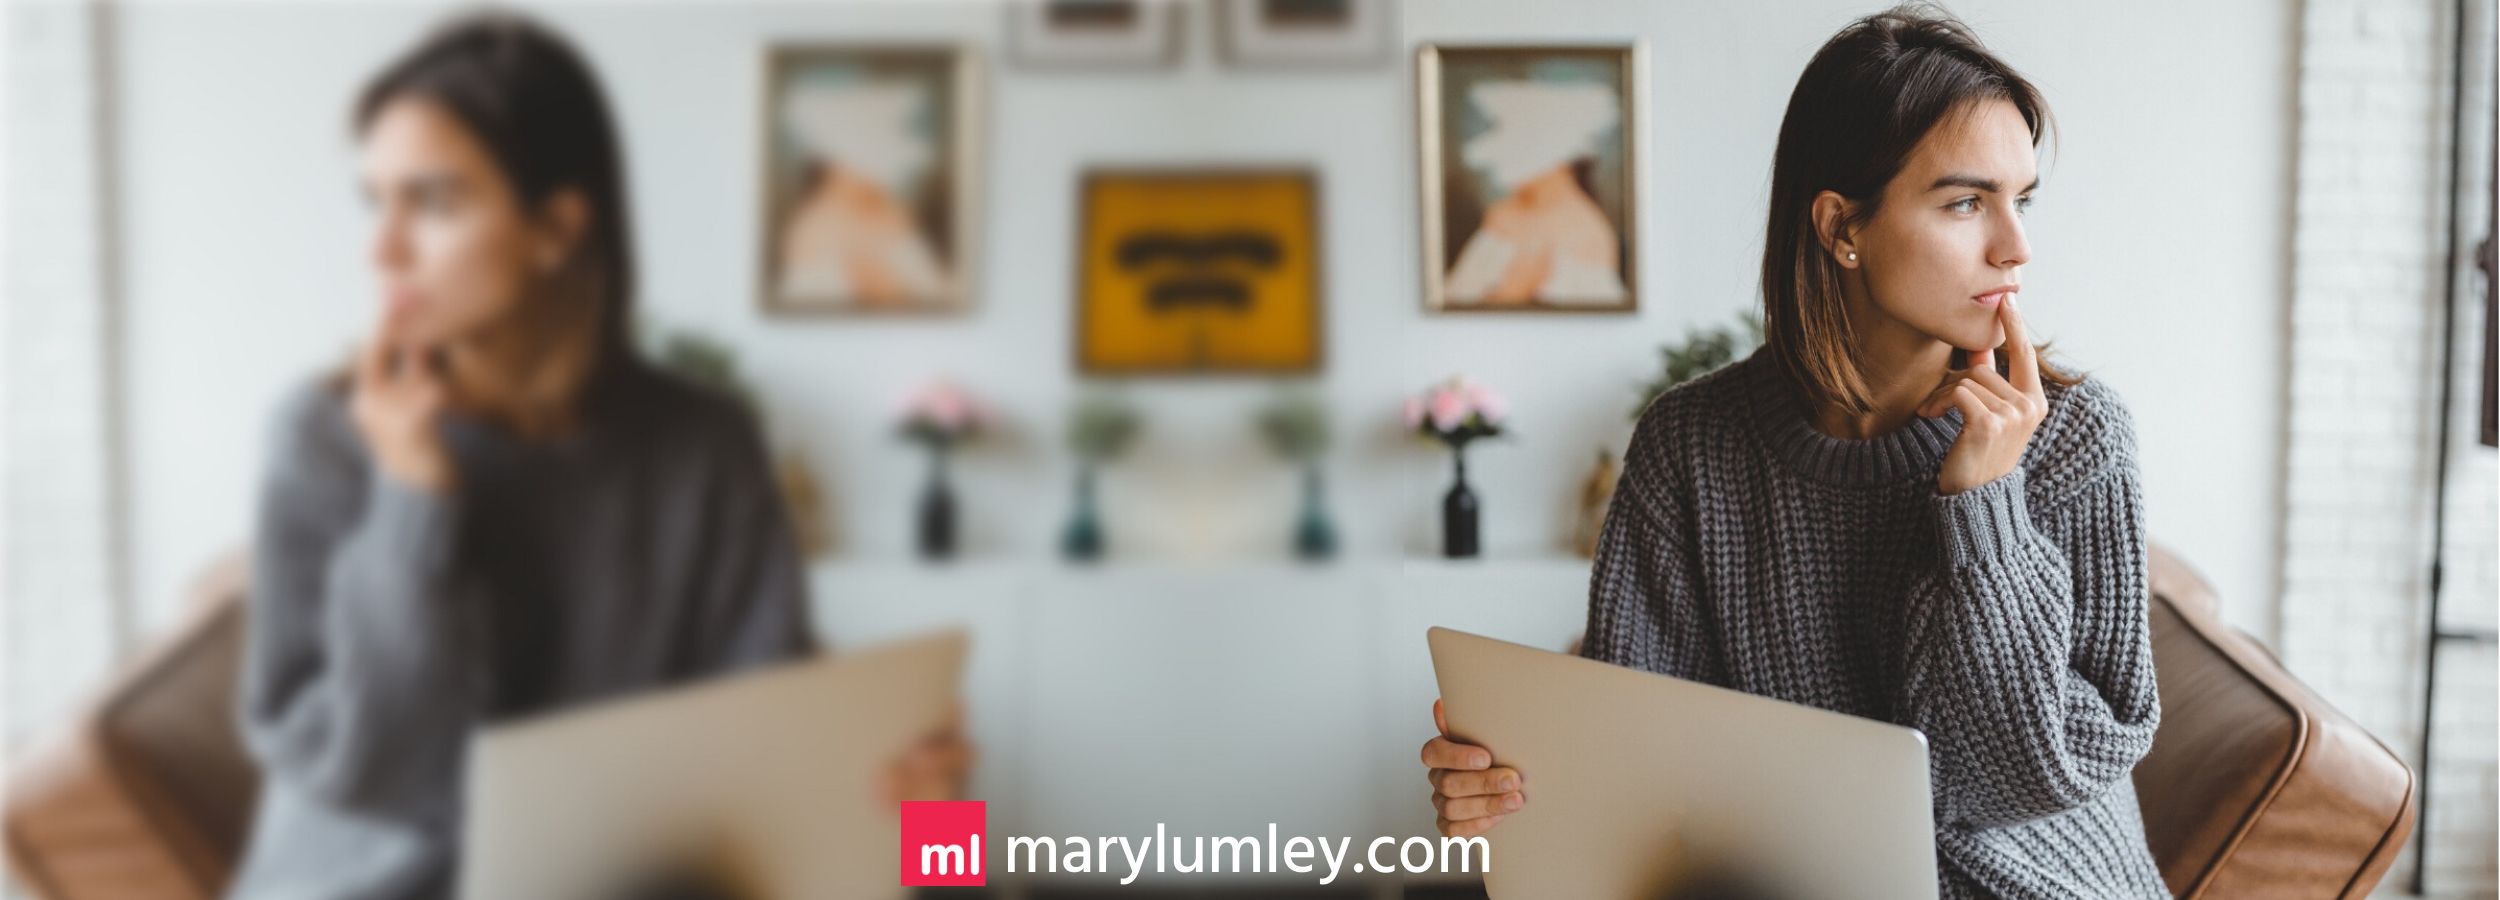 Looking for a cost effective marketing channel during these exceptional times? Here are 3 Pinterest actions you can take right now to help you drive FREE website traffic to your website. #pinterestmarketing #pinterestforbusiness #pinteresttips #marylumley